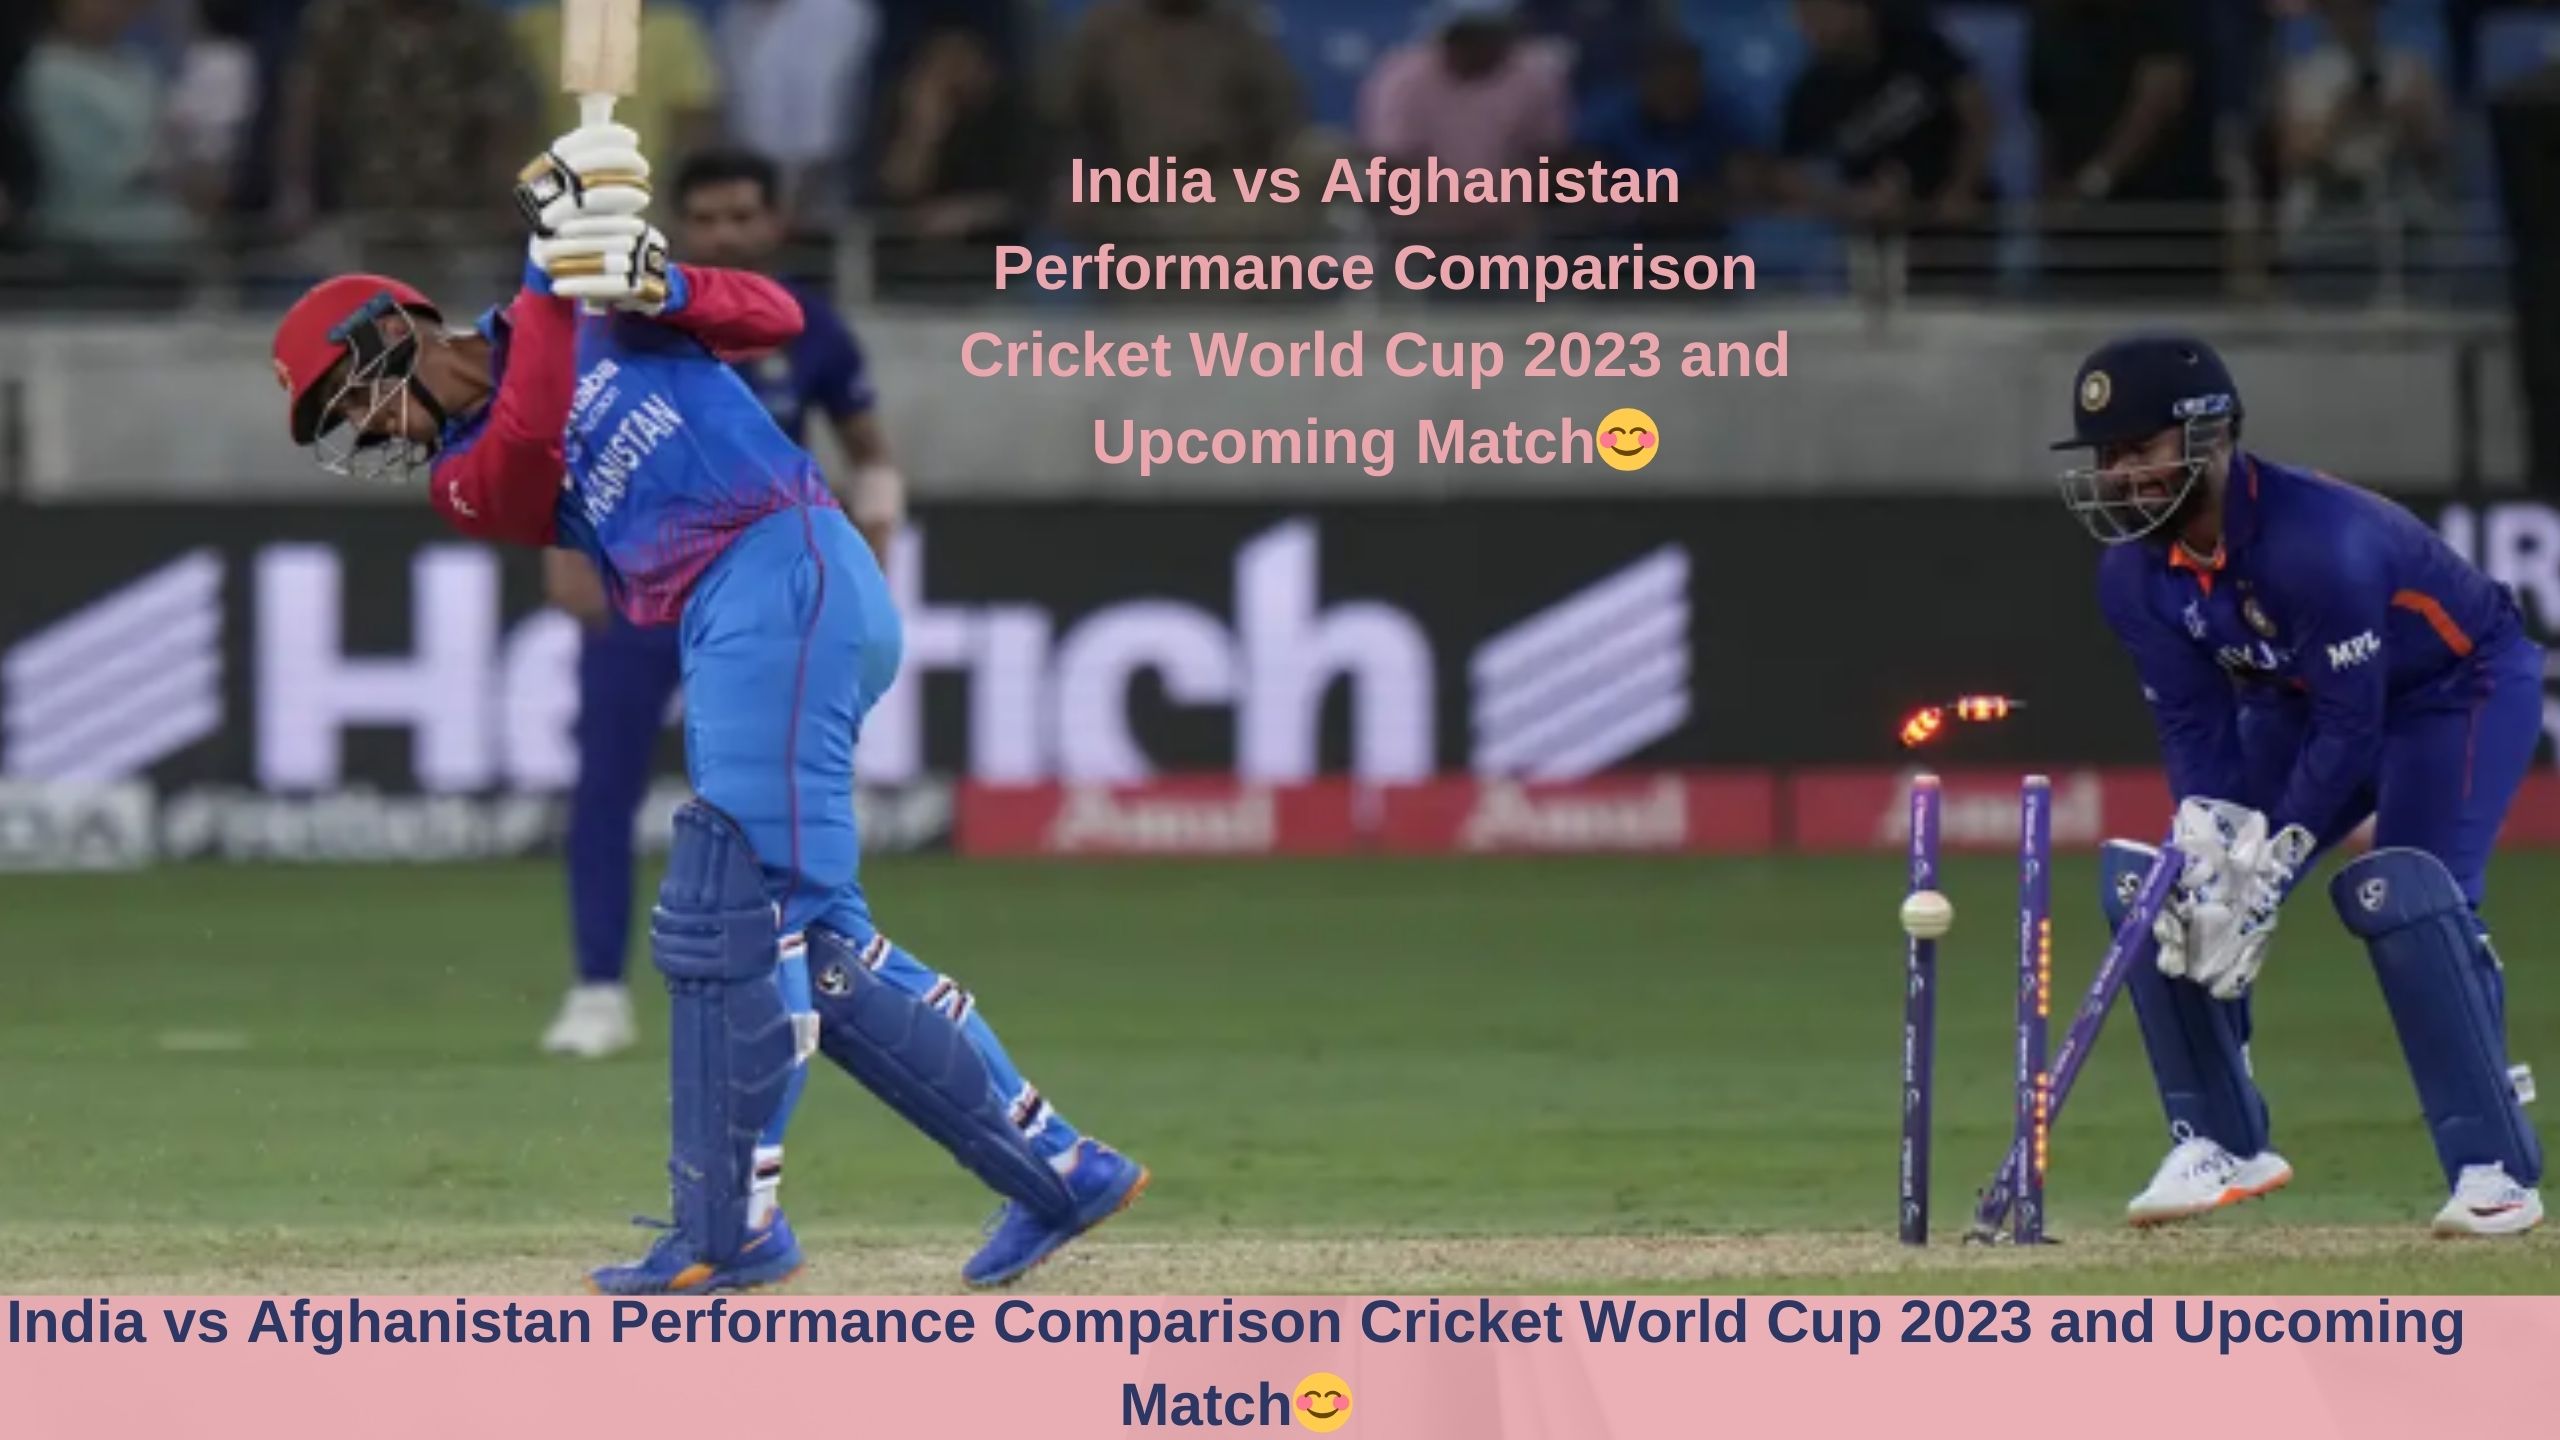 India vs Afghanistan Performance Comparison Cricket World Cup 2023 and Upcoming Match😊